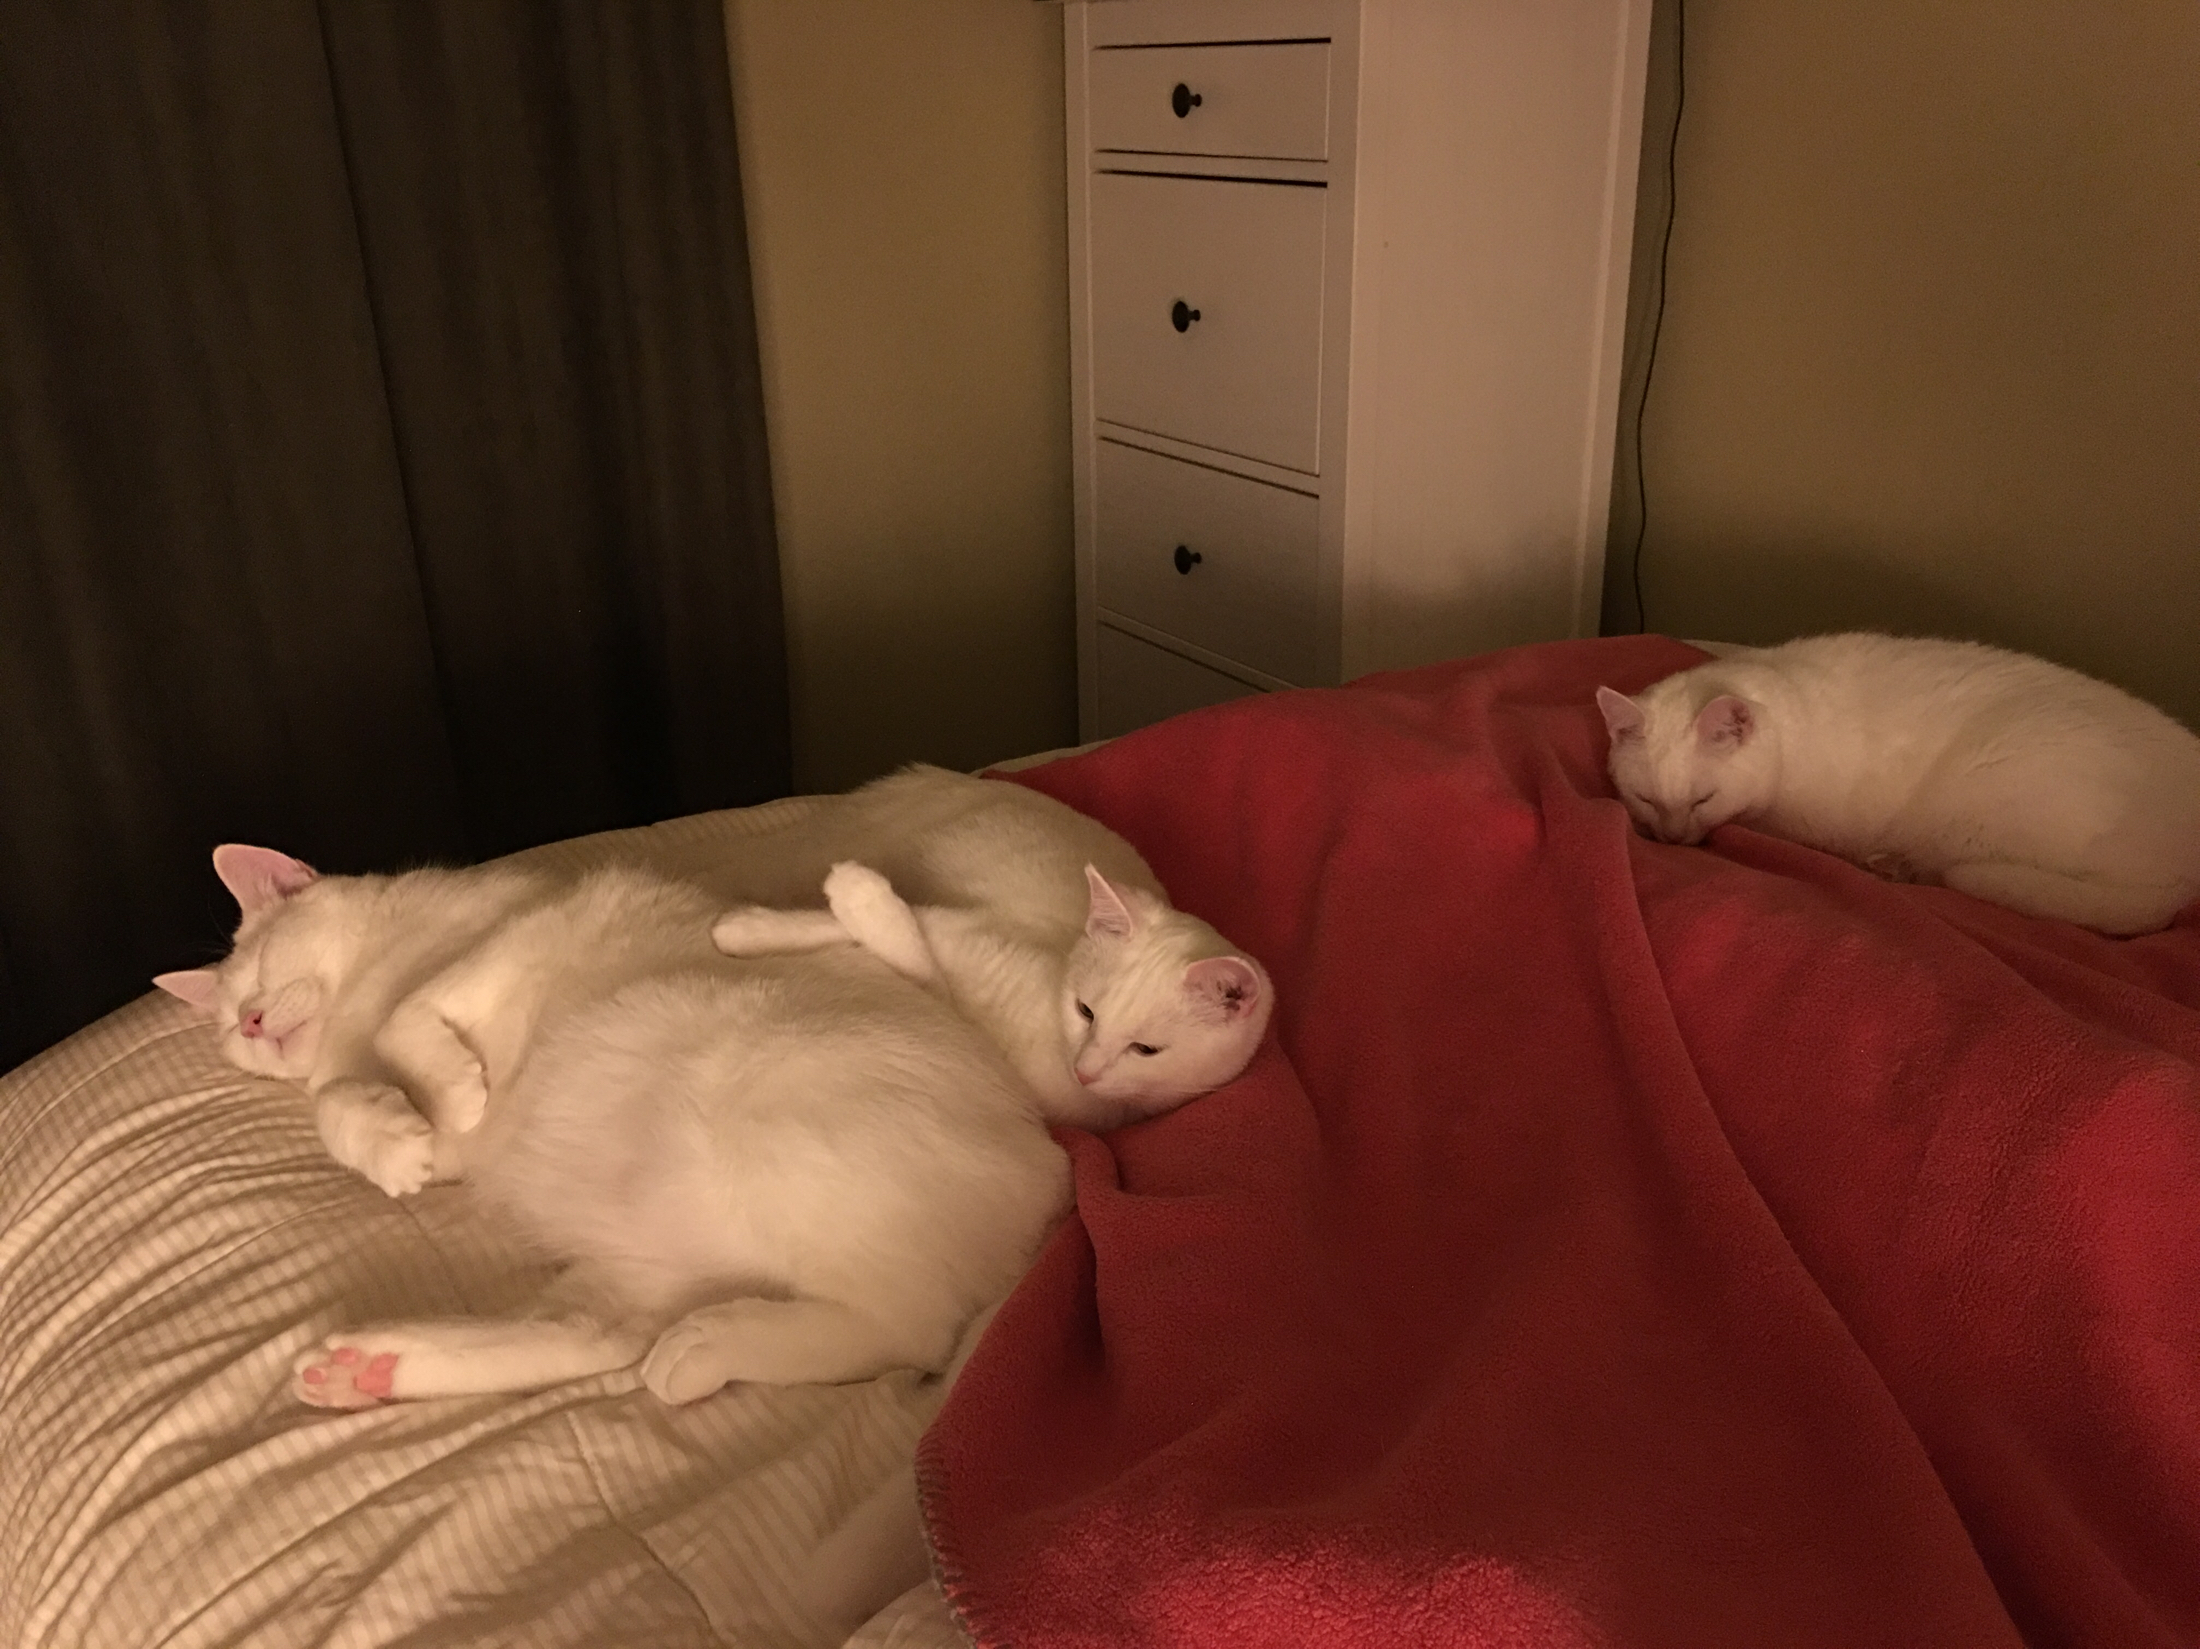 Three on the bed